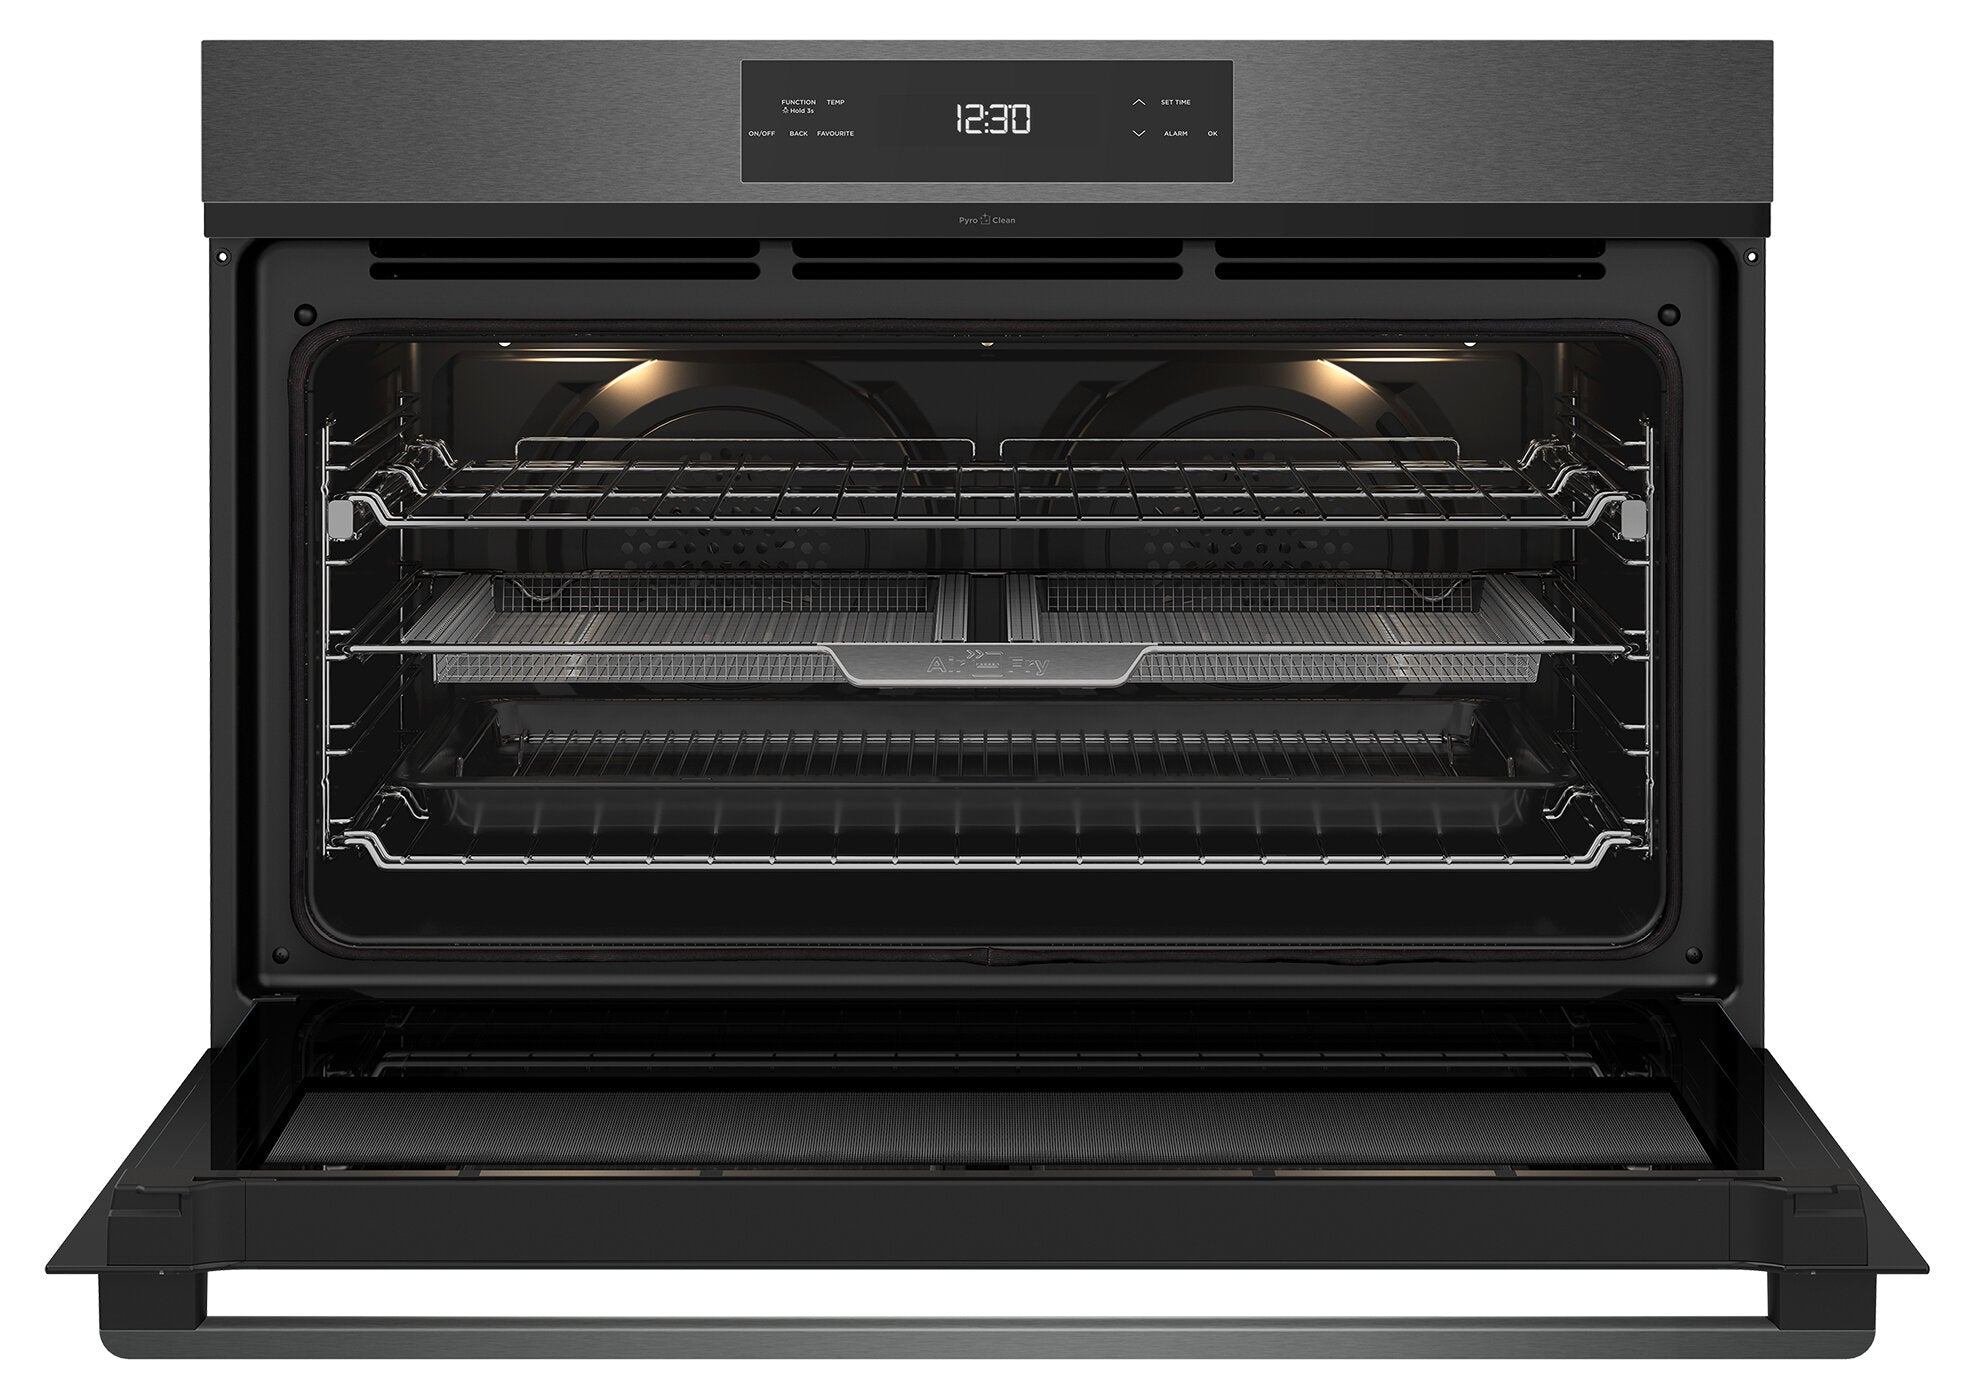 Westinghouse 90 cm Pyrolytic Electric Built-In Oven - Brisbane Home Appliances